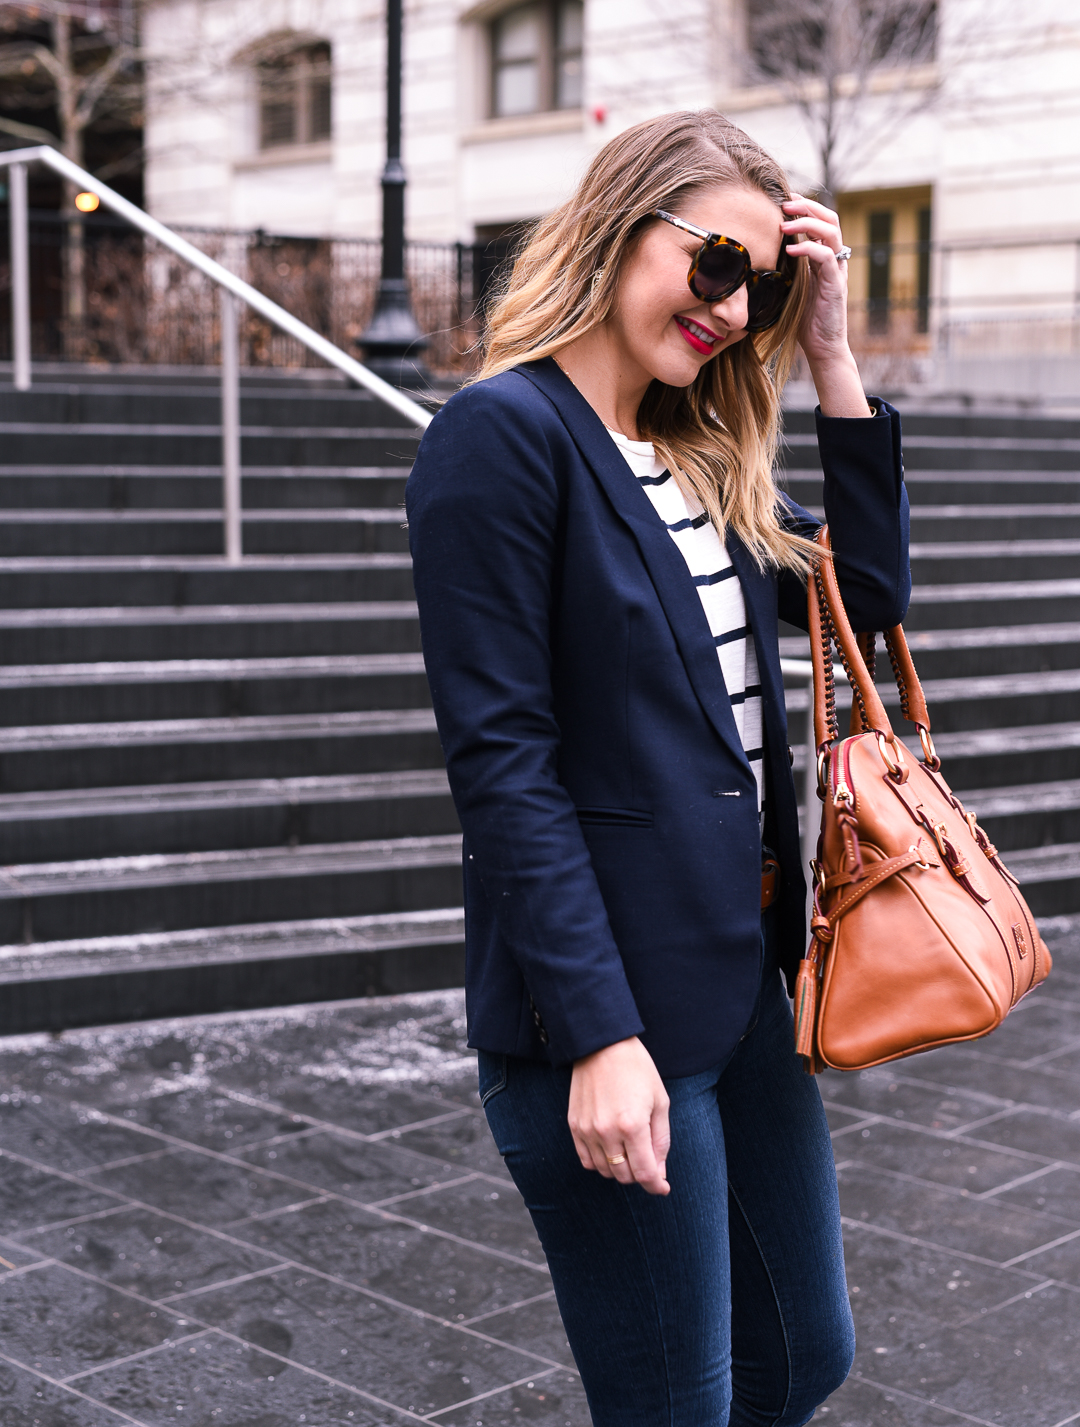 business casual outfit ideas - work life balance tips by popular Chicago lifestyle blogger Visions of Vogue